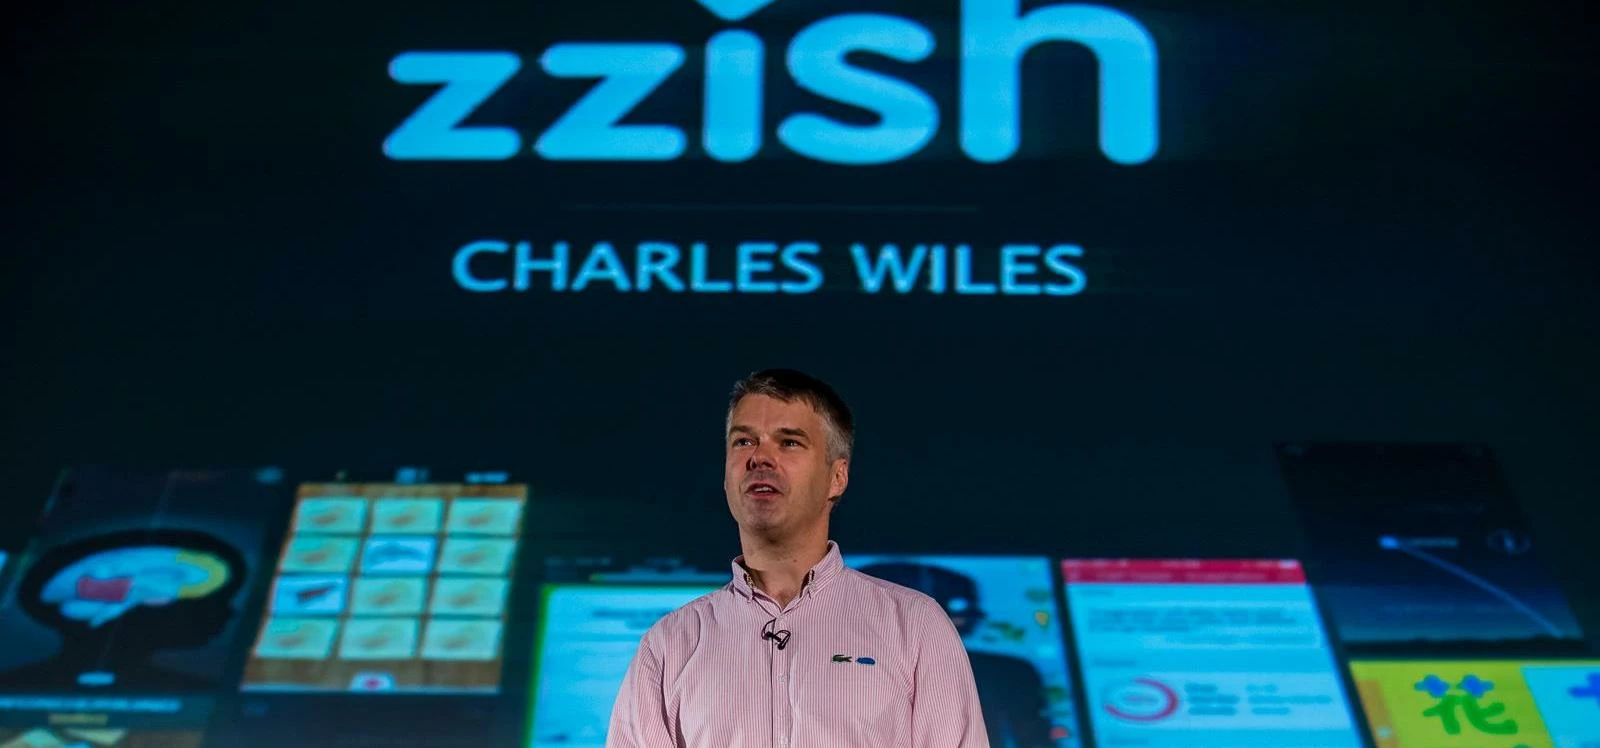 Charles Wiles, CEO and Co-Founder of EdTech startup Zzish wants to democratise access to the advance